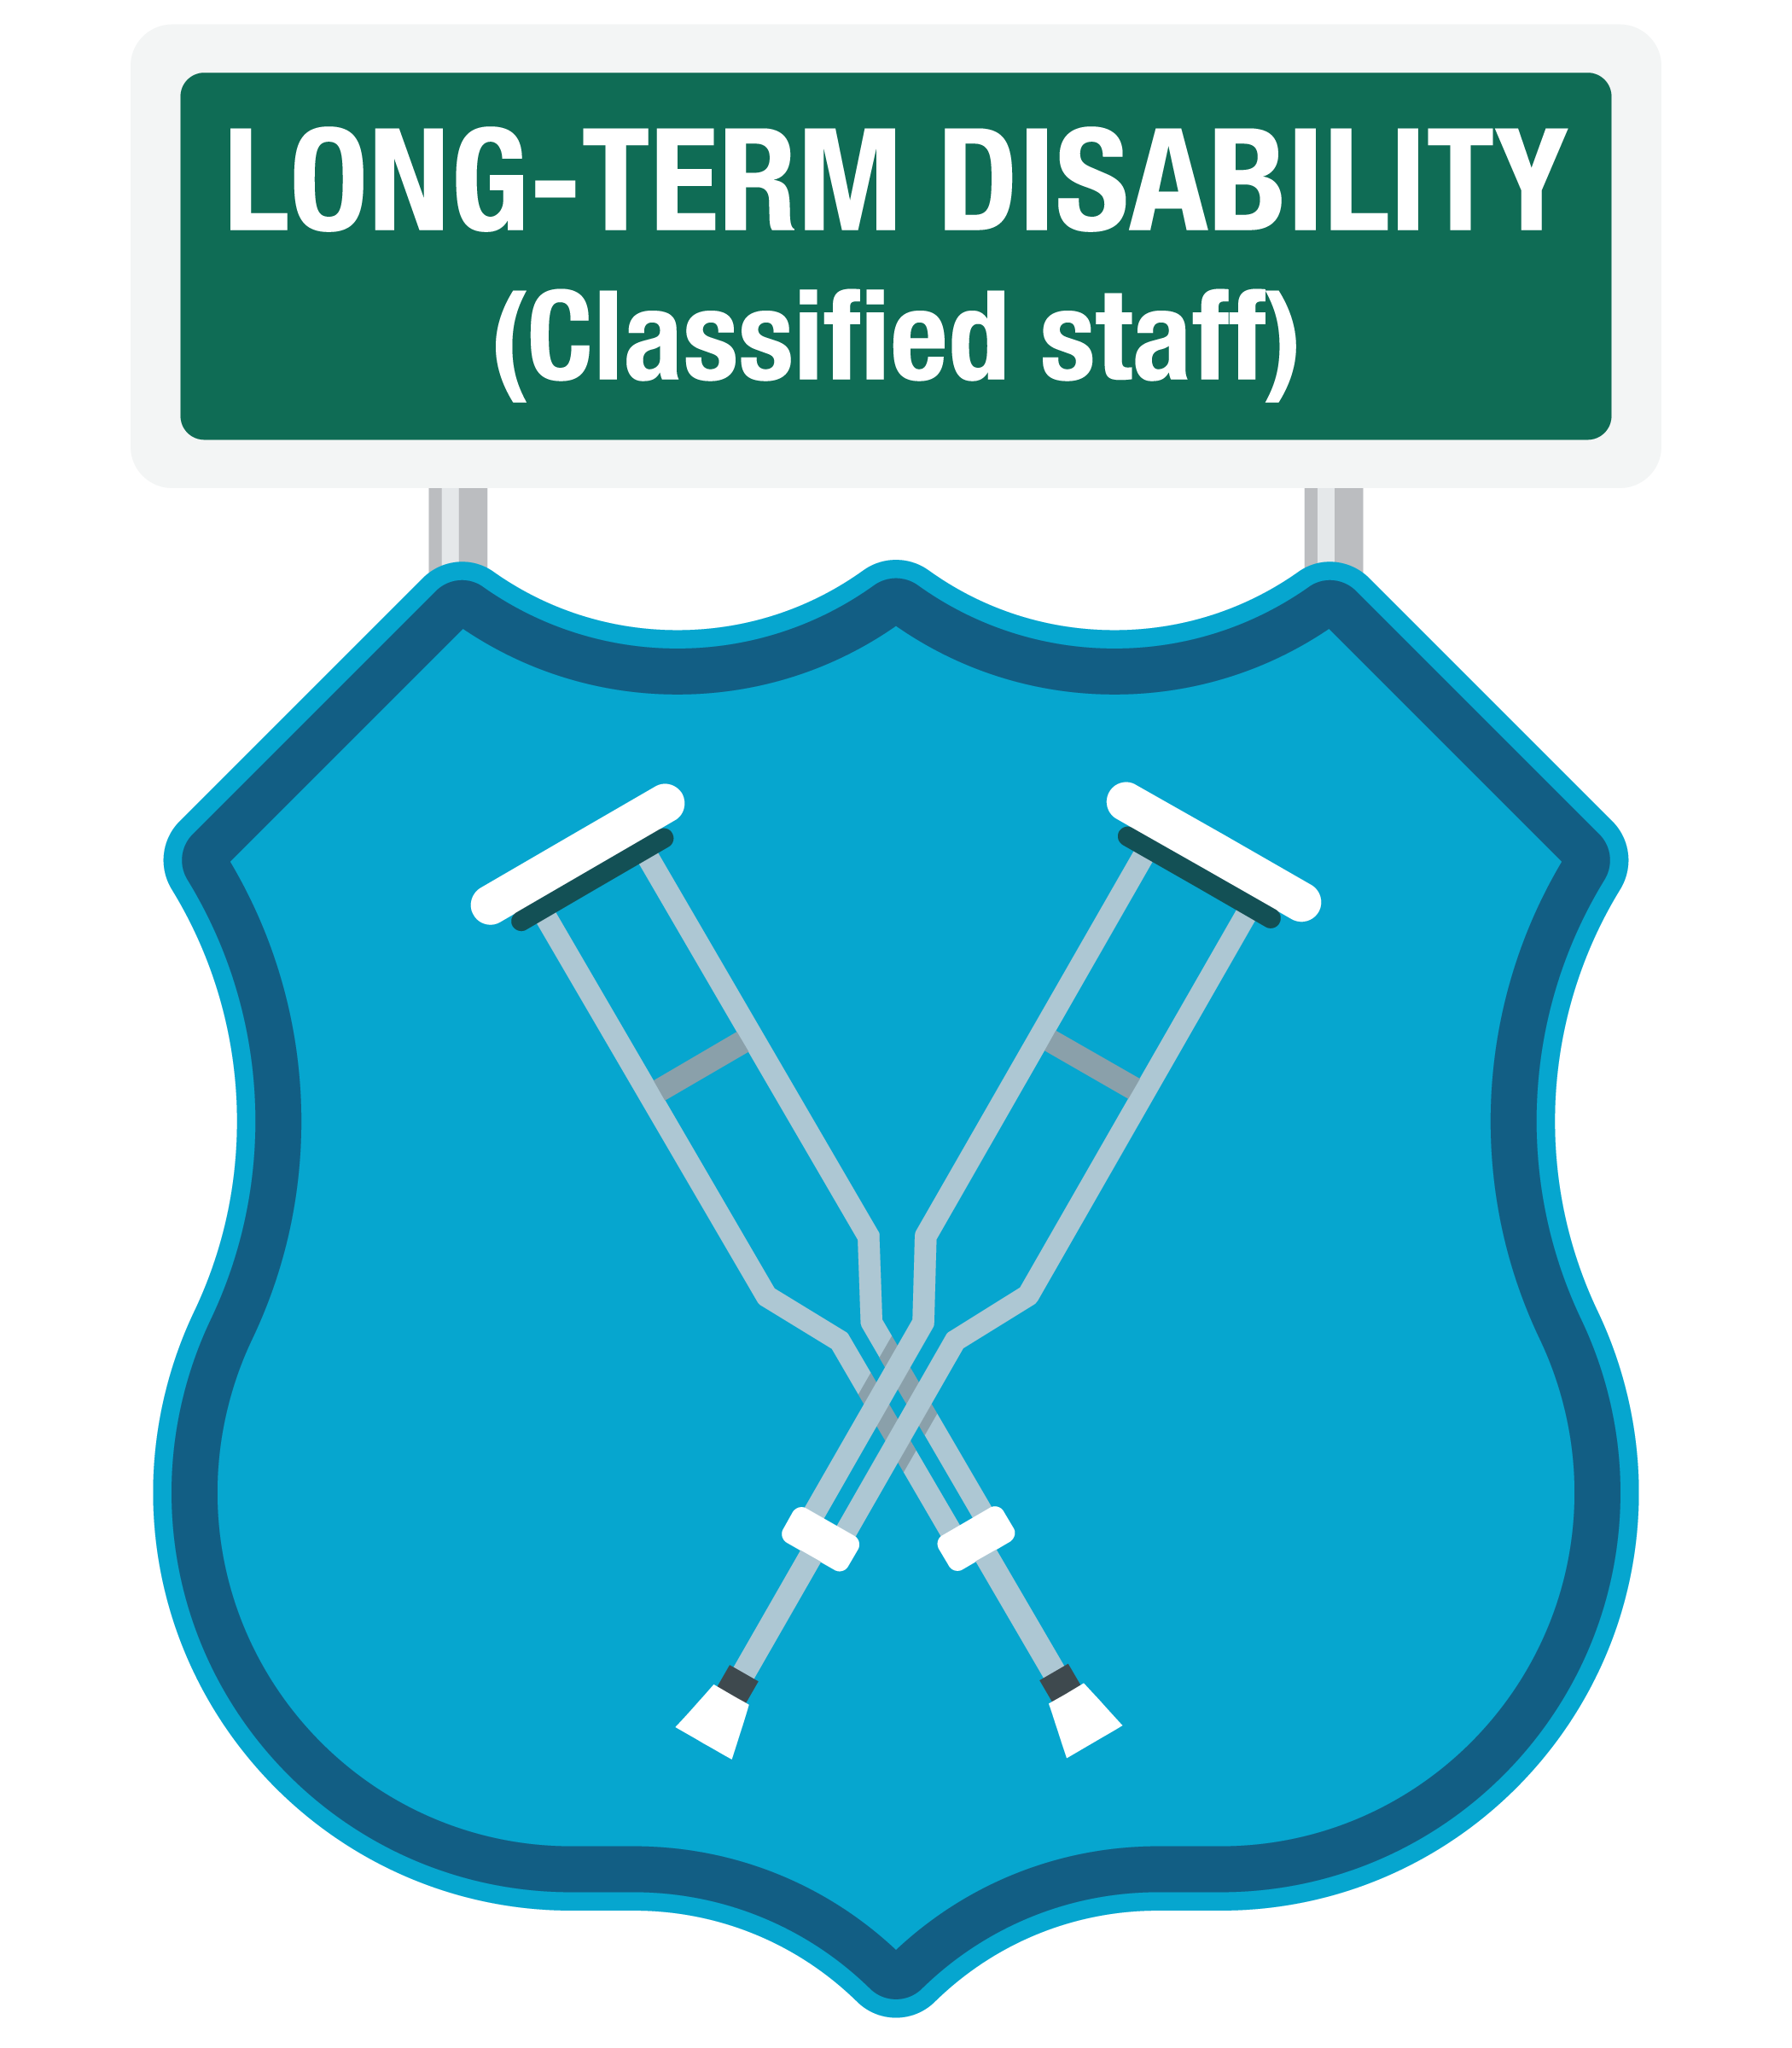 Long-term disability (classified staff)